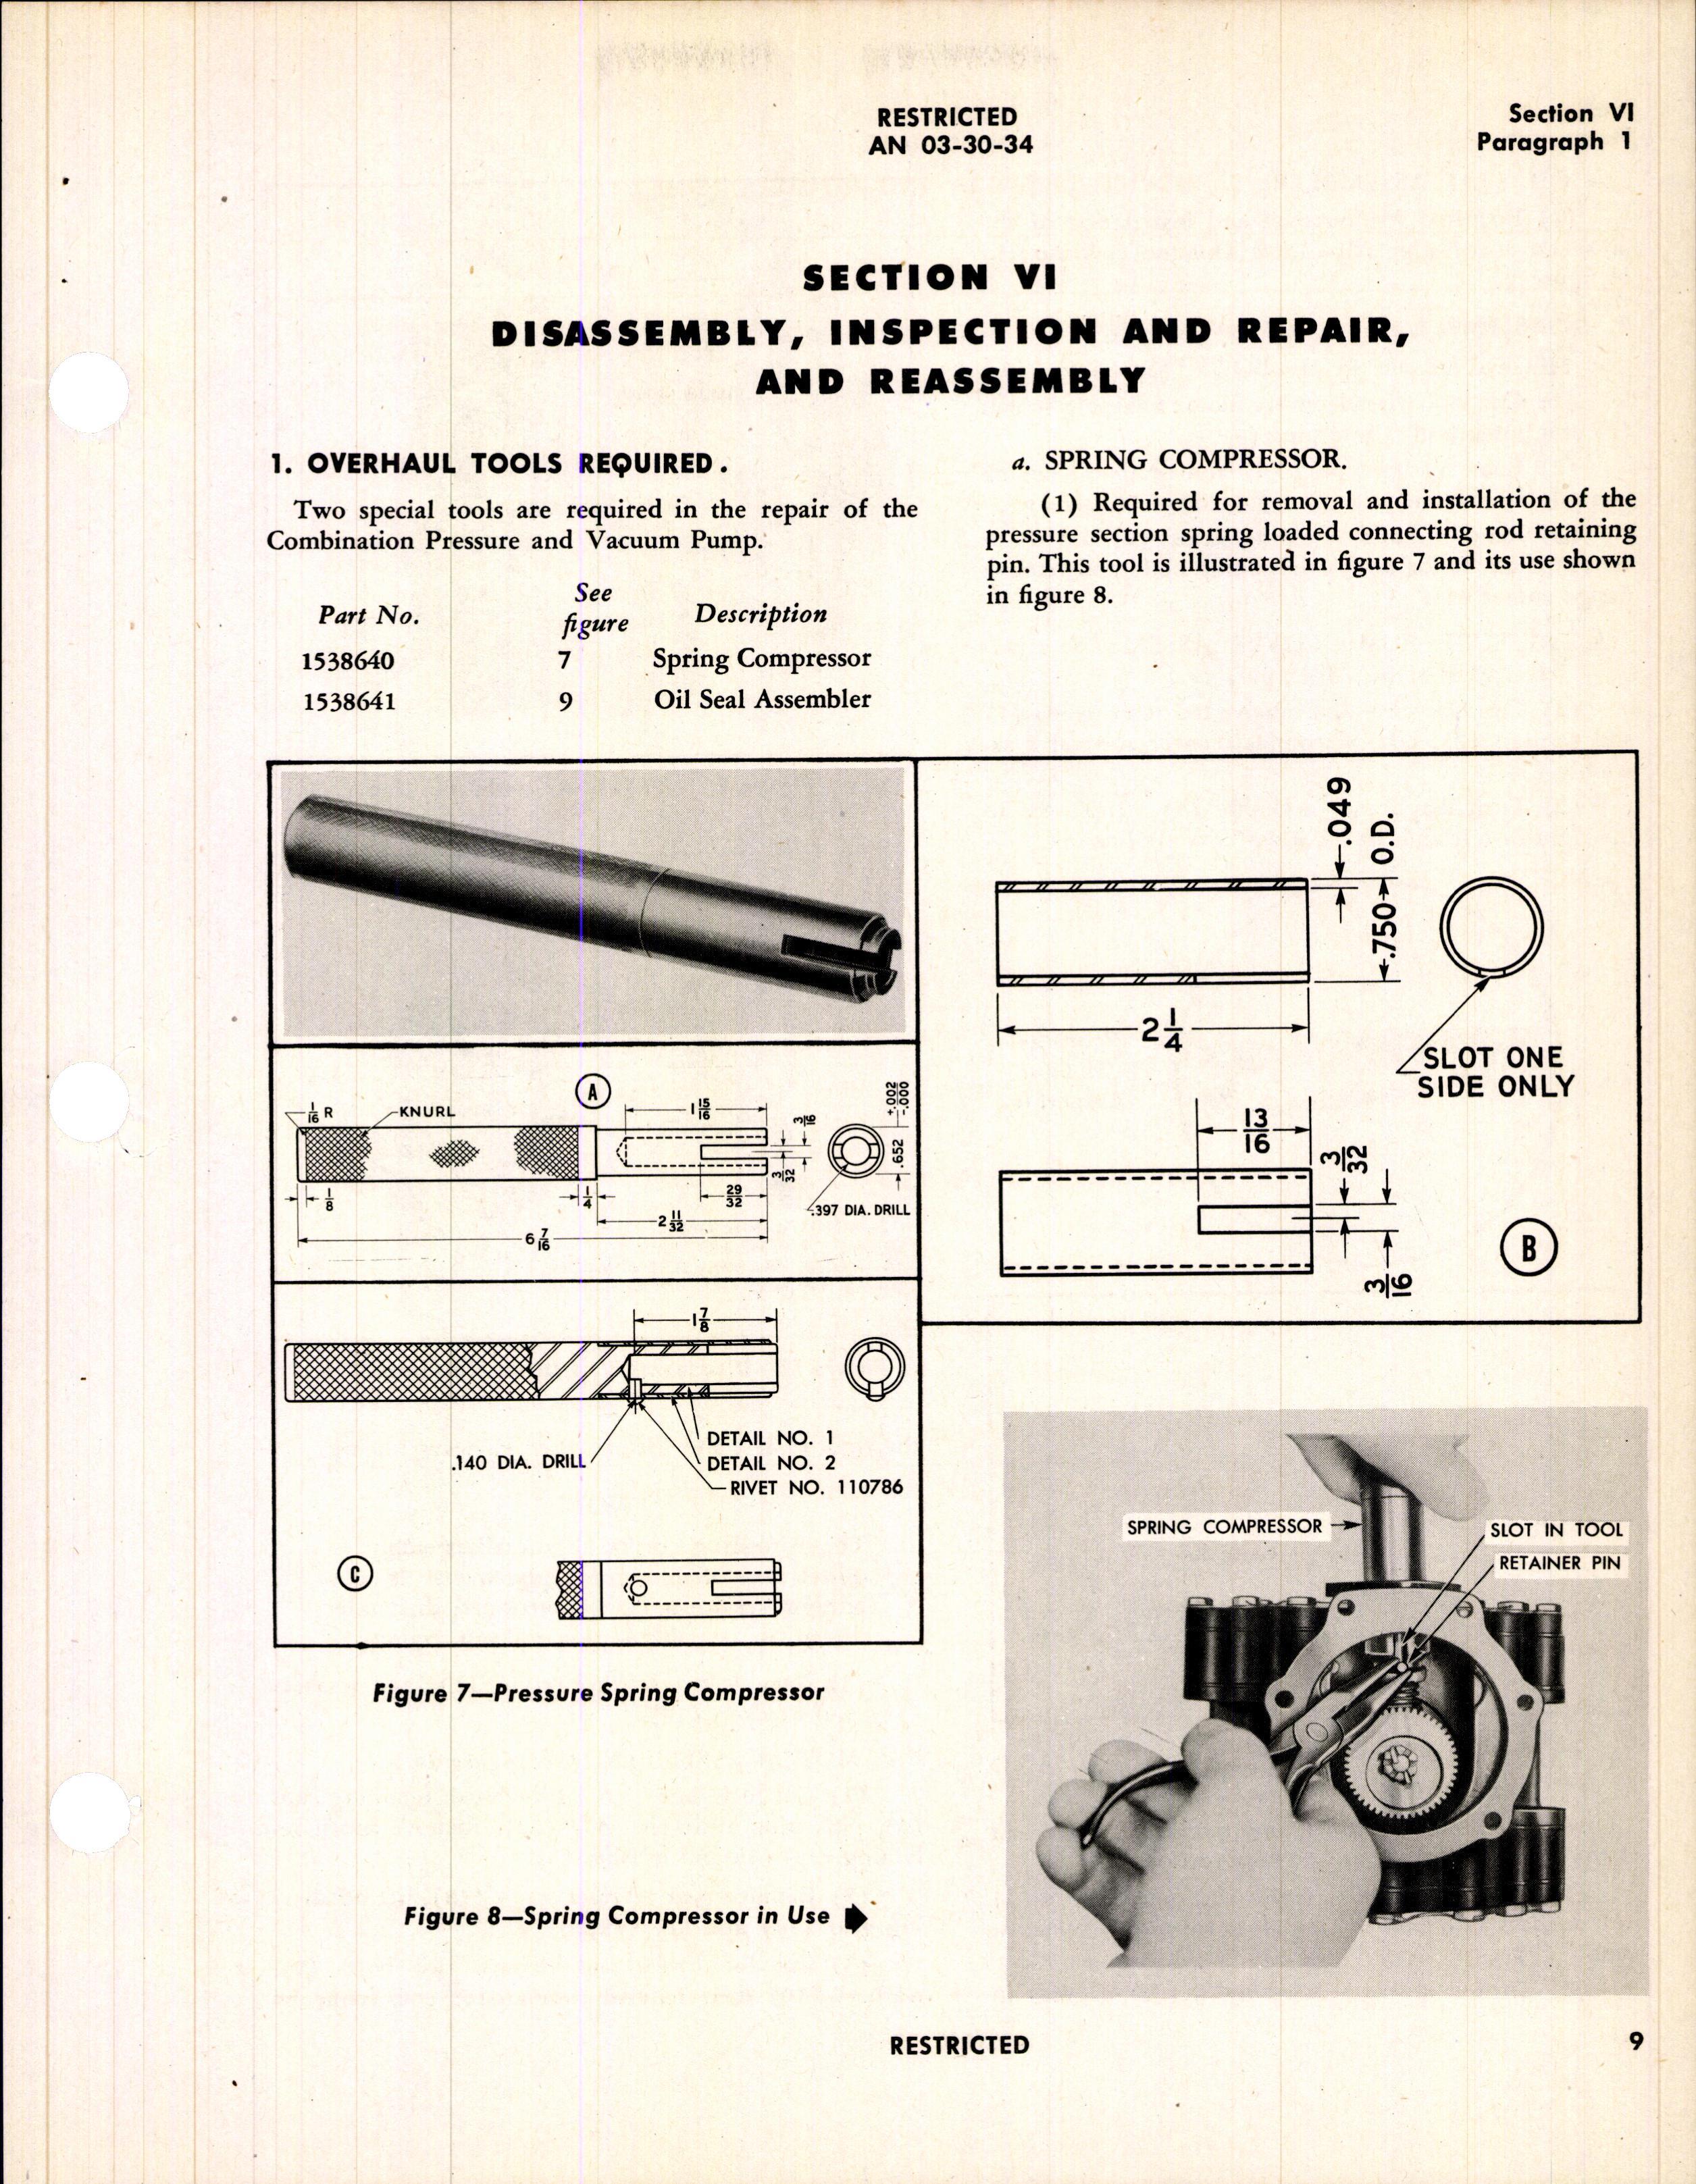 Sample page 13 from AirCorps Library document: Handbook of Instructions with Parts Catalog for Combination Pressure and Vacuum Pump